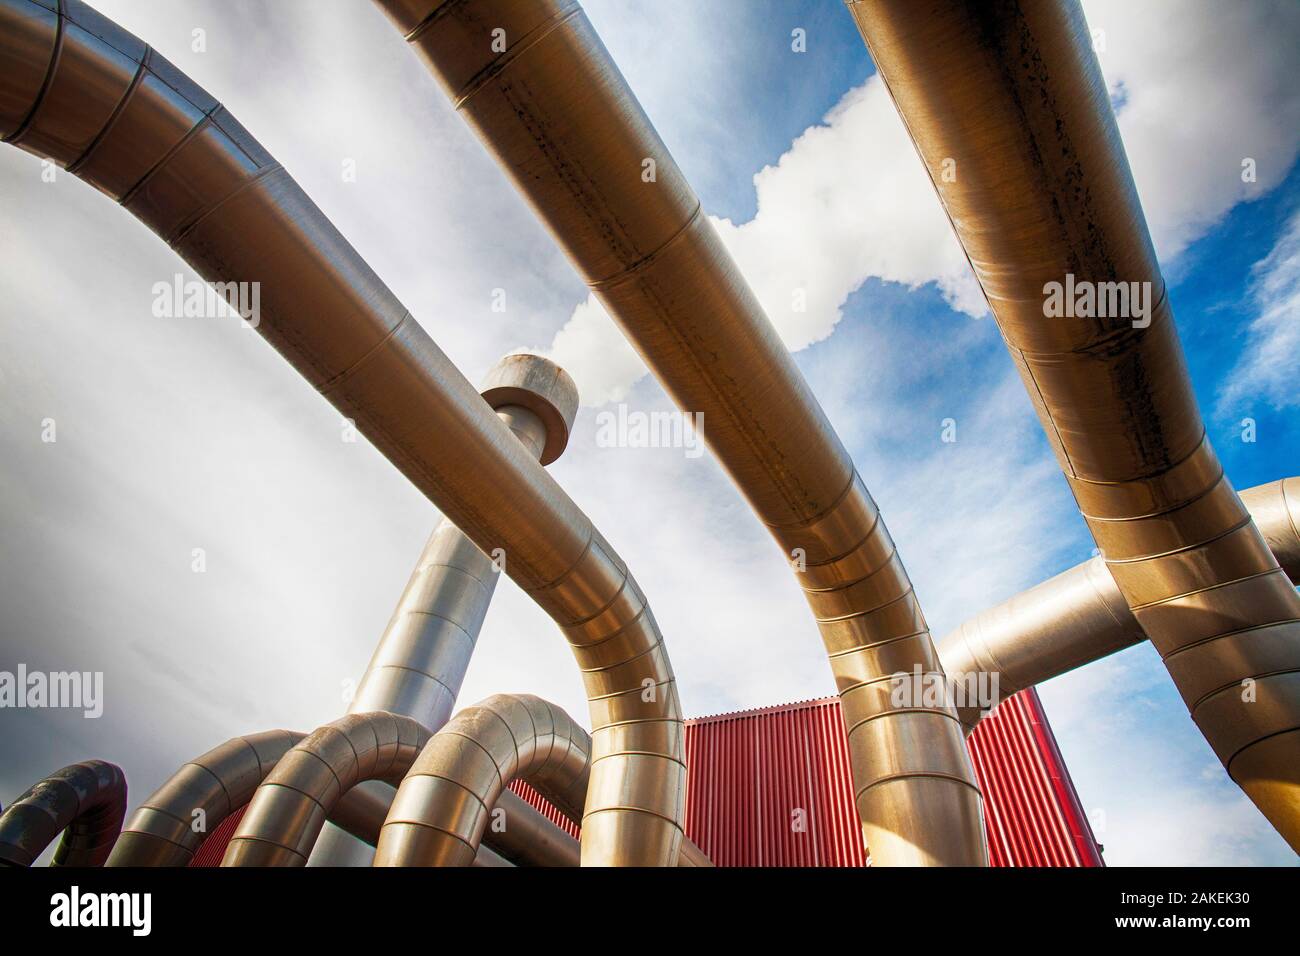 Part of geothermal plant that removes water from the steam before it is fed into turbines at Krafla geothermal power station near Myvatn, Iceland,September 2010. Stock Photo